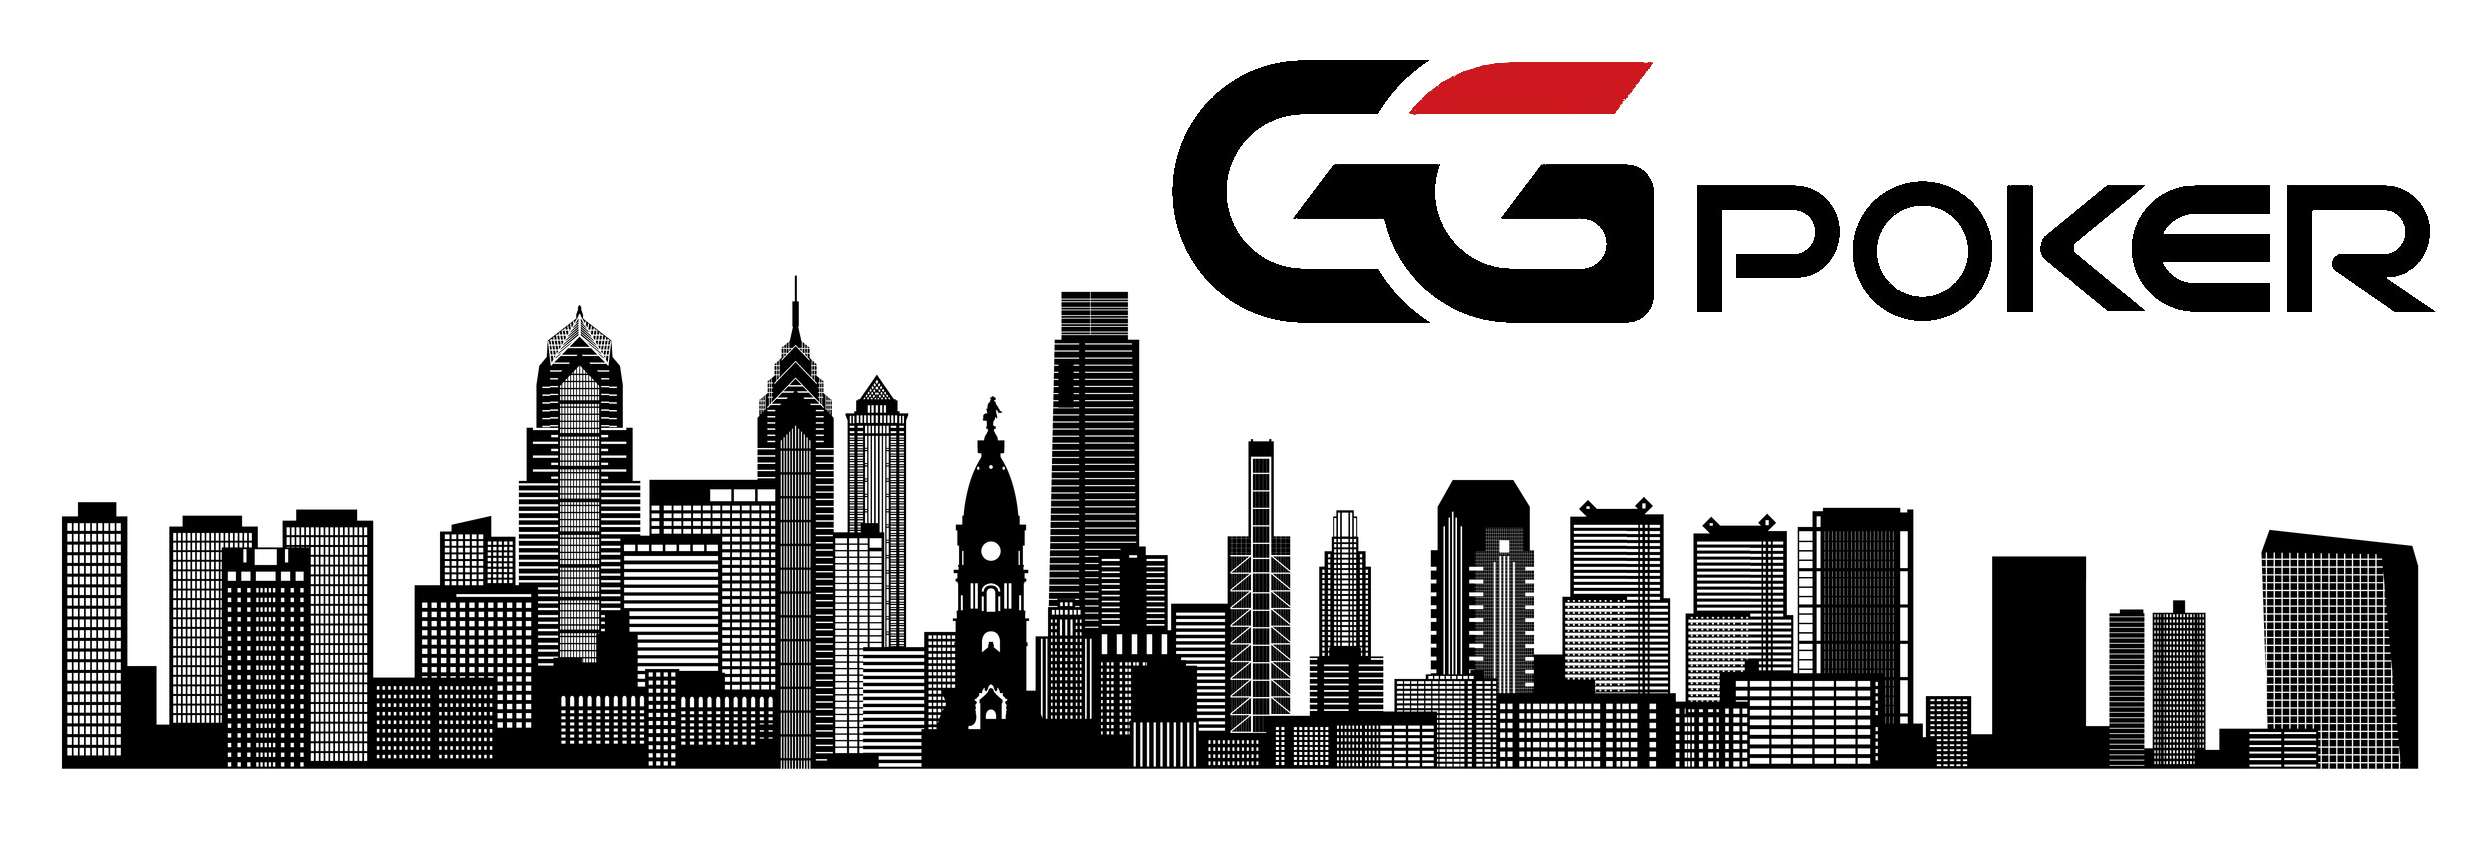 GGPoker Logo is seen over a graphic depiction of the Philadelphia Skyline